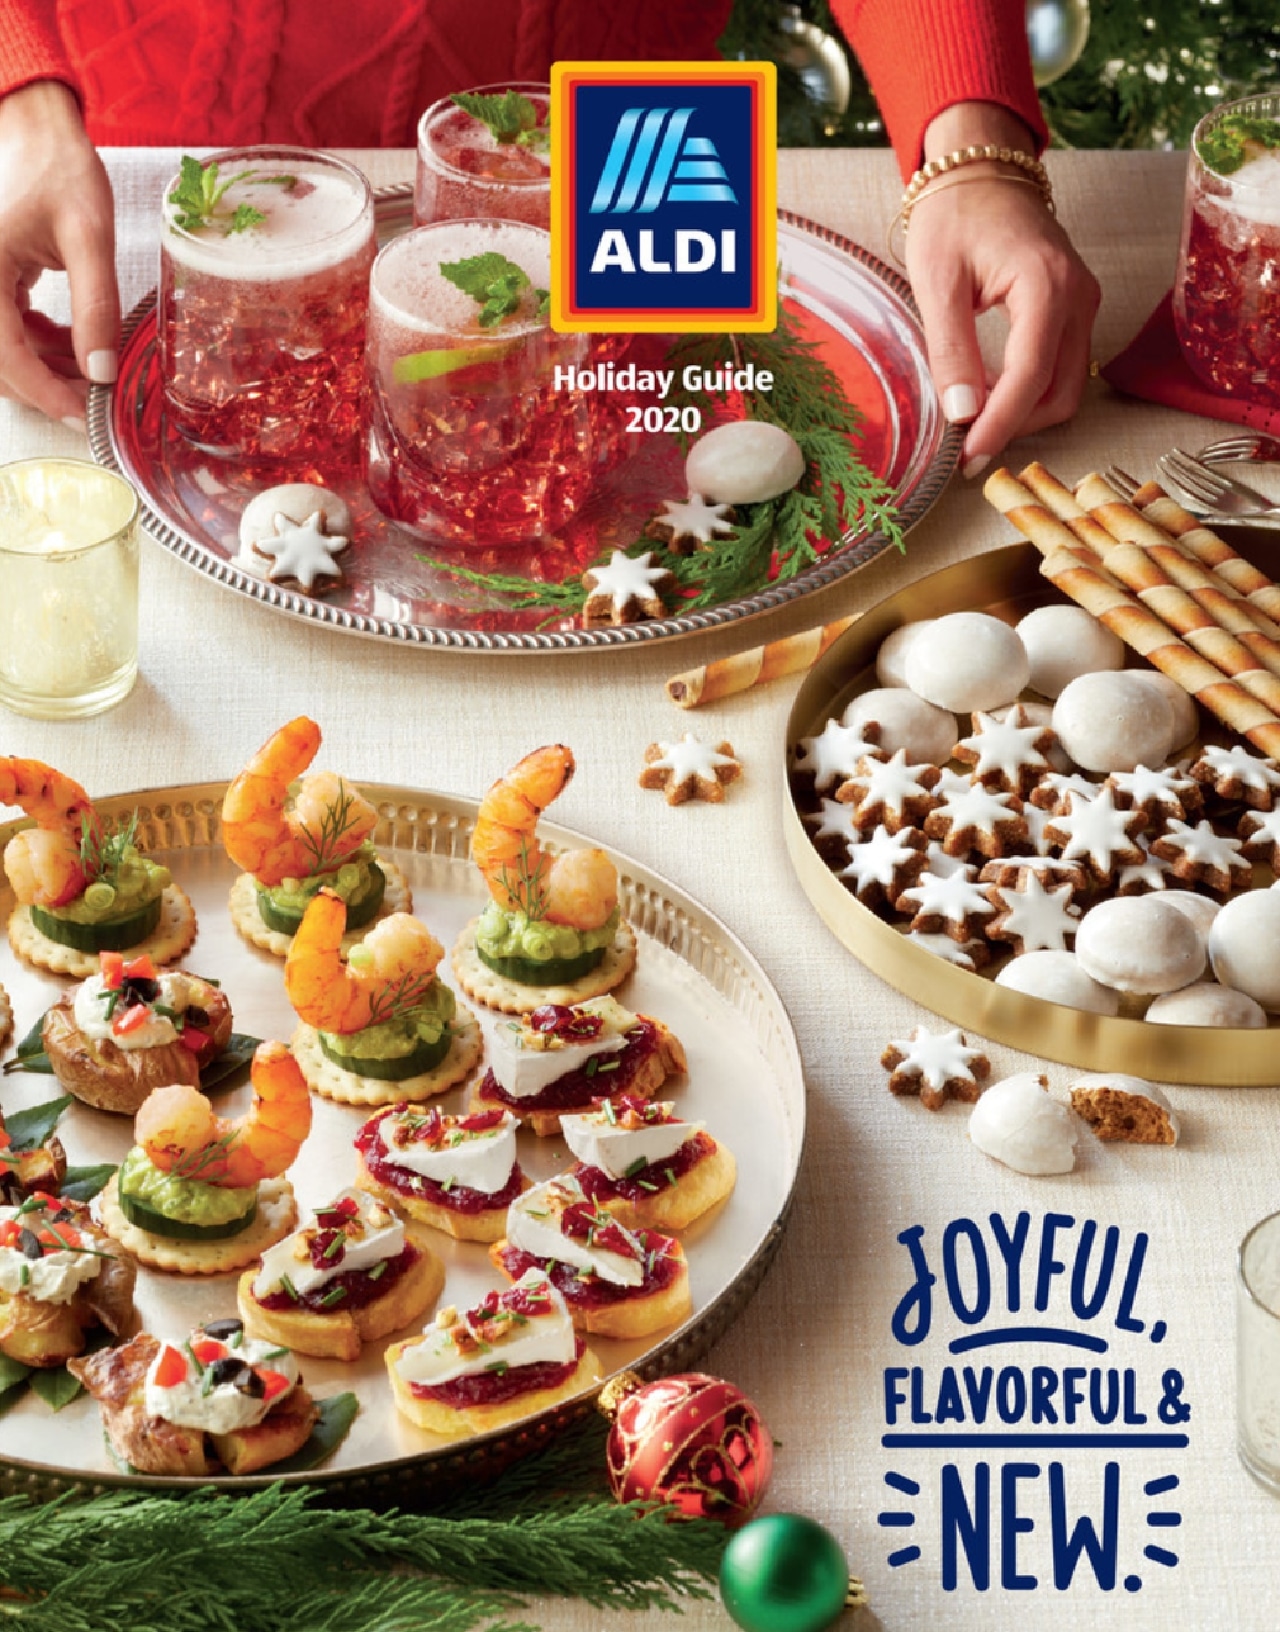 Highlights From the 2020 Aldi Holiday Guide | ALDI REVIEWER